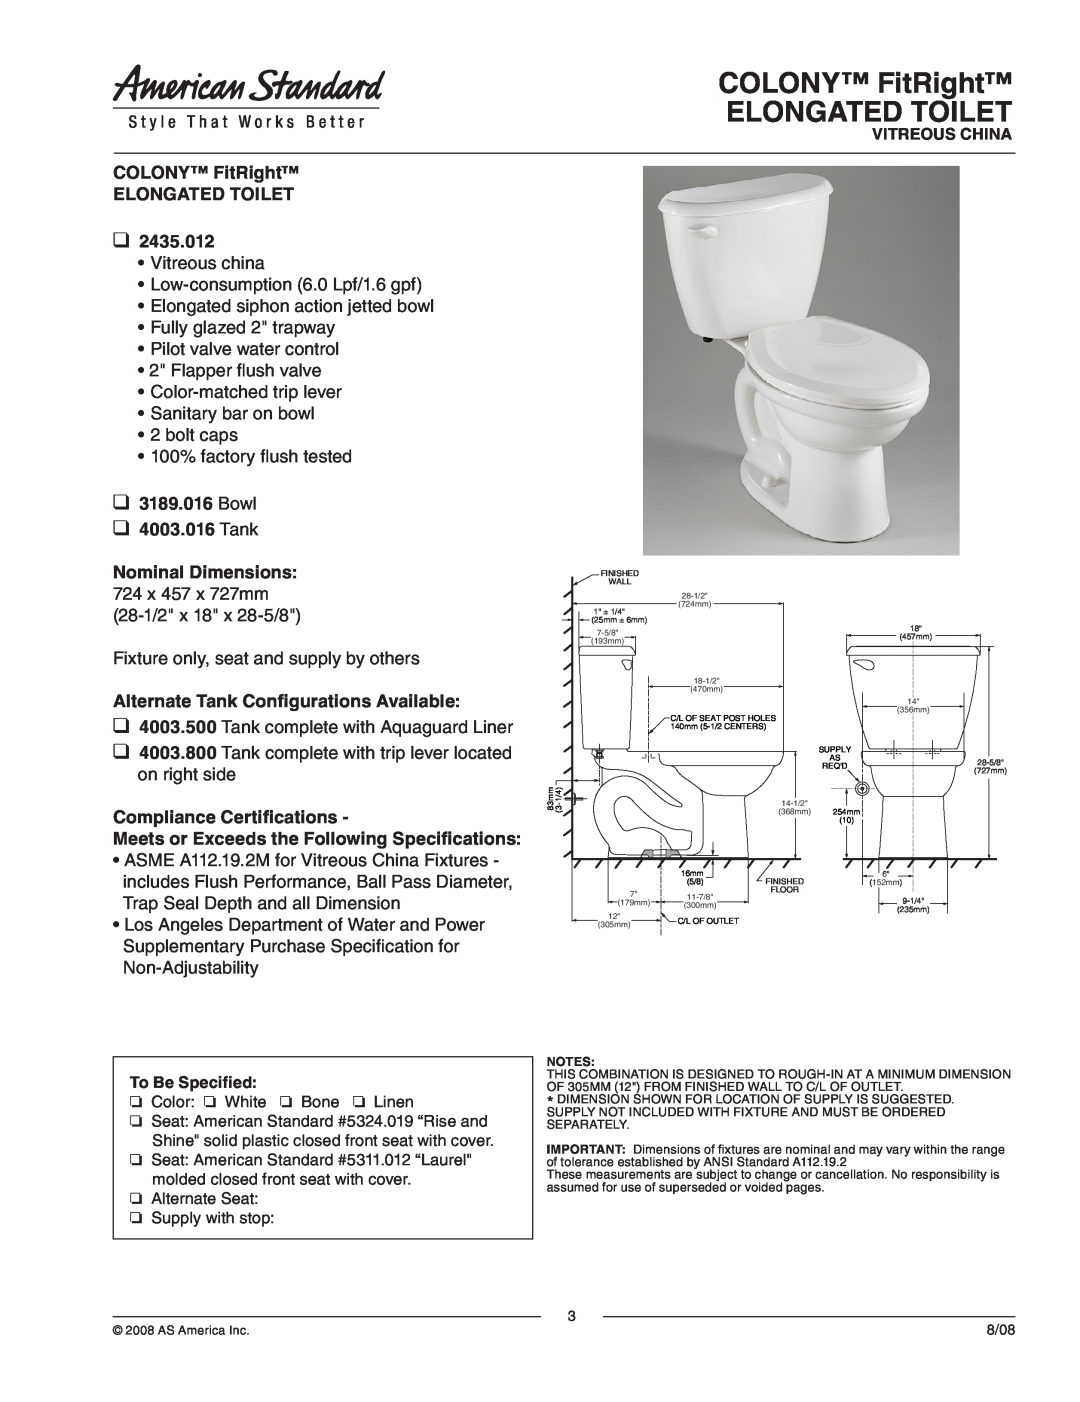 American Standard 2435.012 dimensions COLONY FitRight ELONGATED TOILET, Bowl 4003.016 Tank, Compliance Certifications 